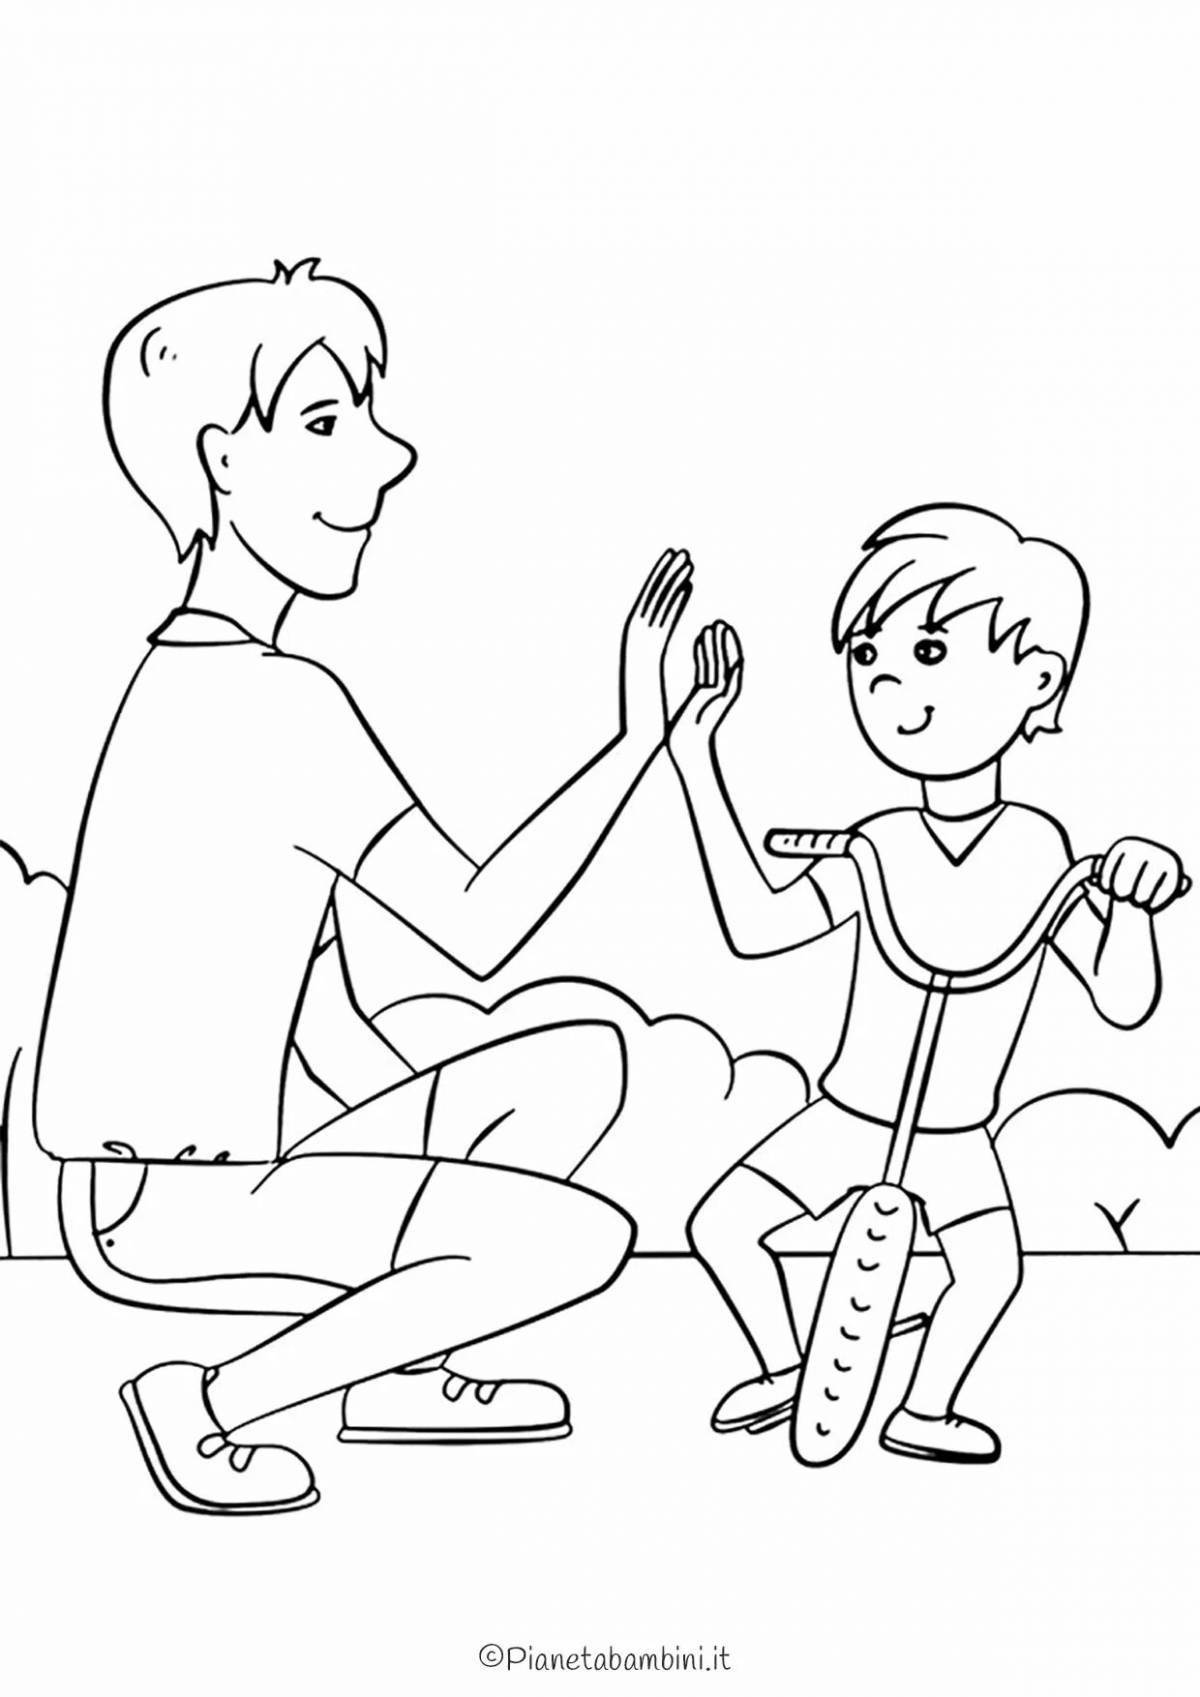 Happy birthday dad from son glamor coloring book